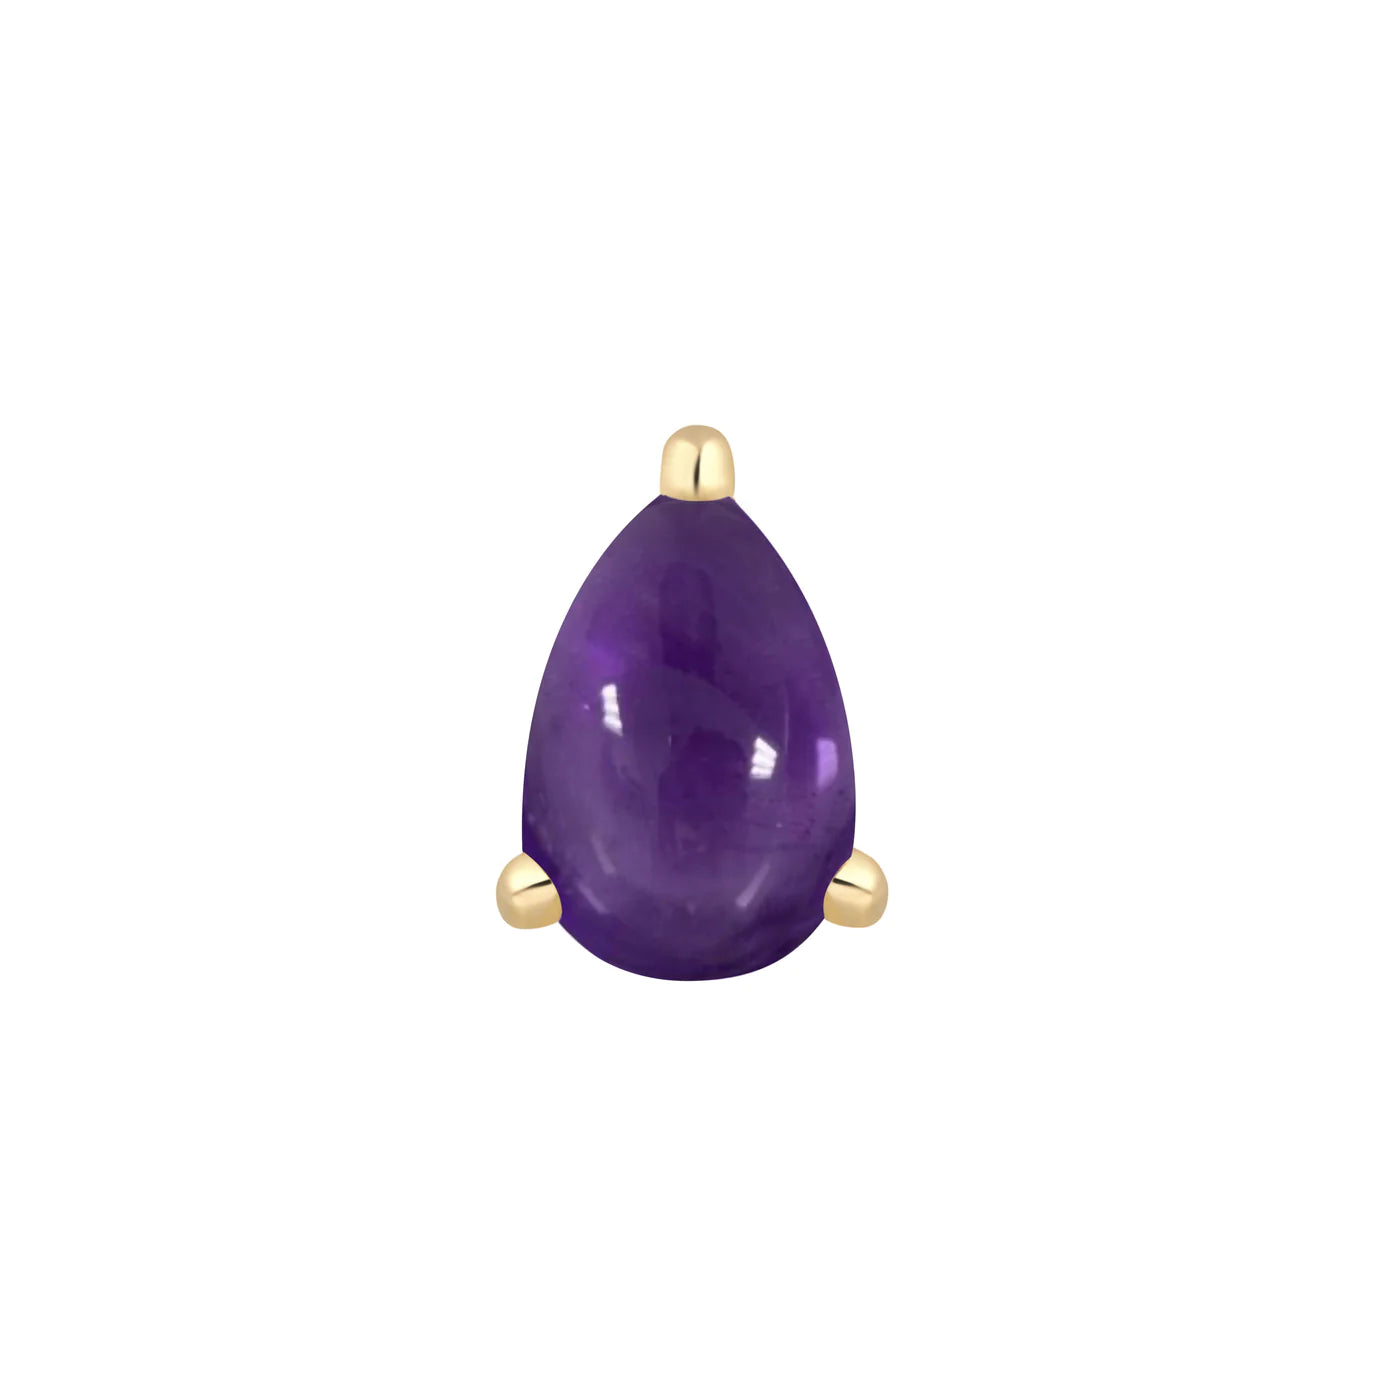 BUDDHA JEWELRY - AMETHYST PRONG PEAR - 14KT SOLID GOLD - THREADLESS END